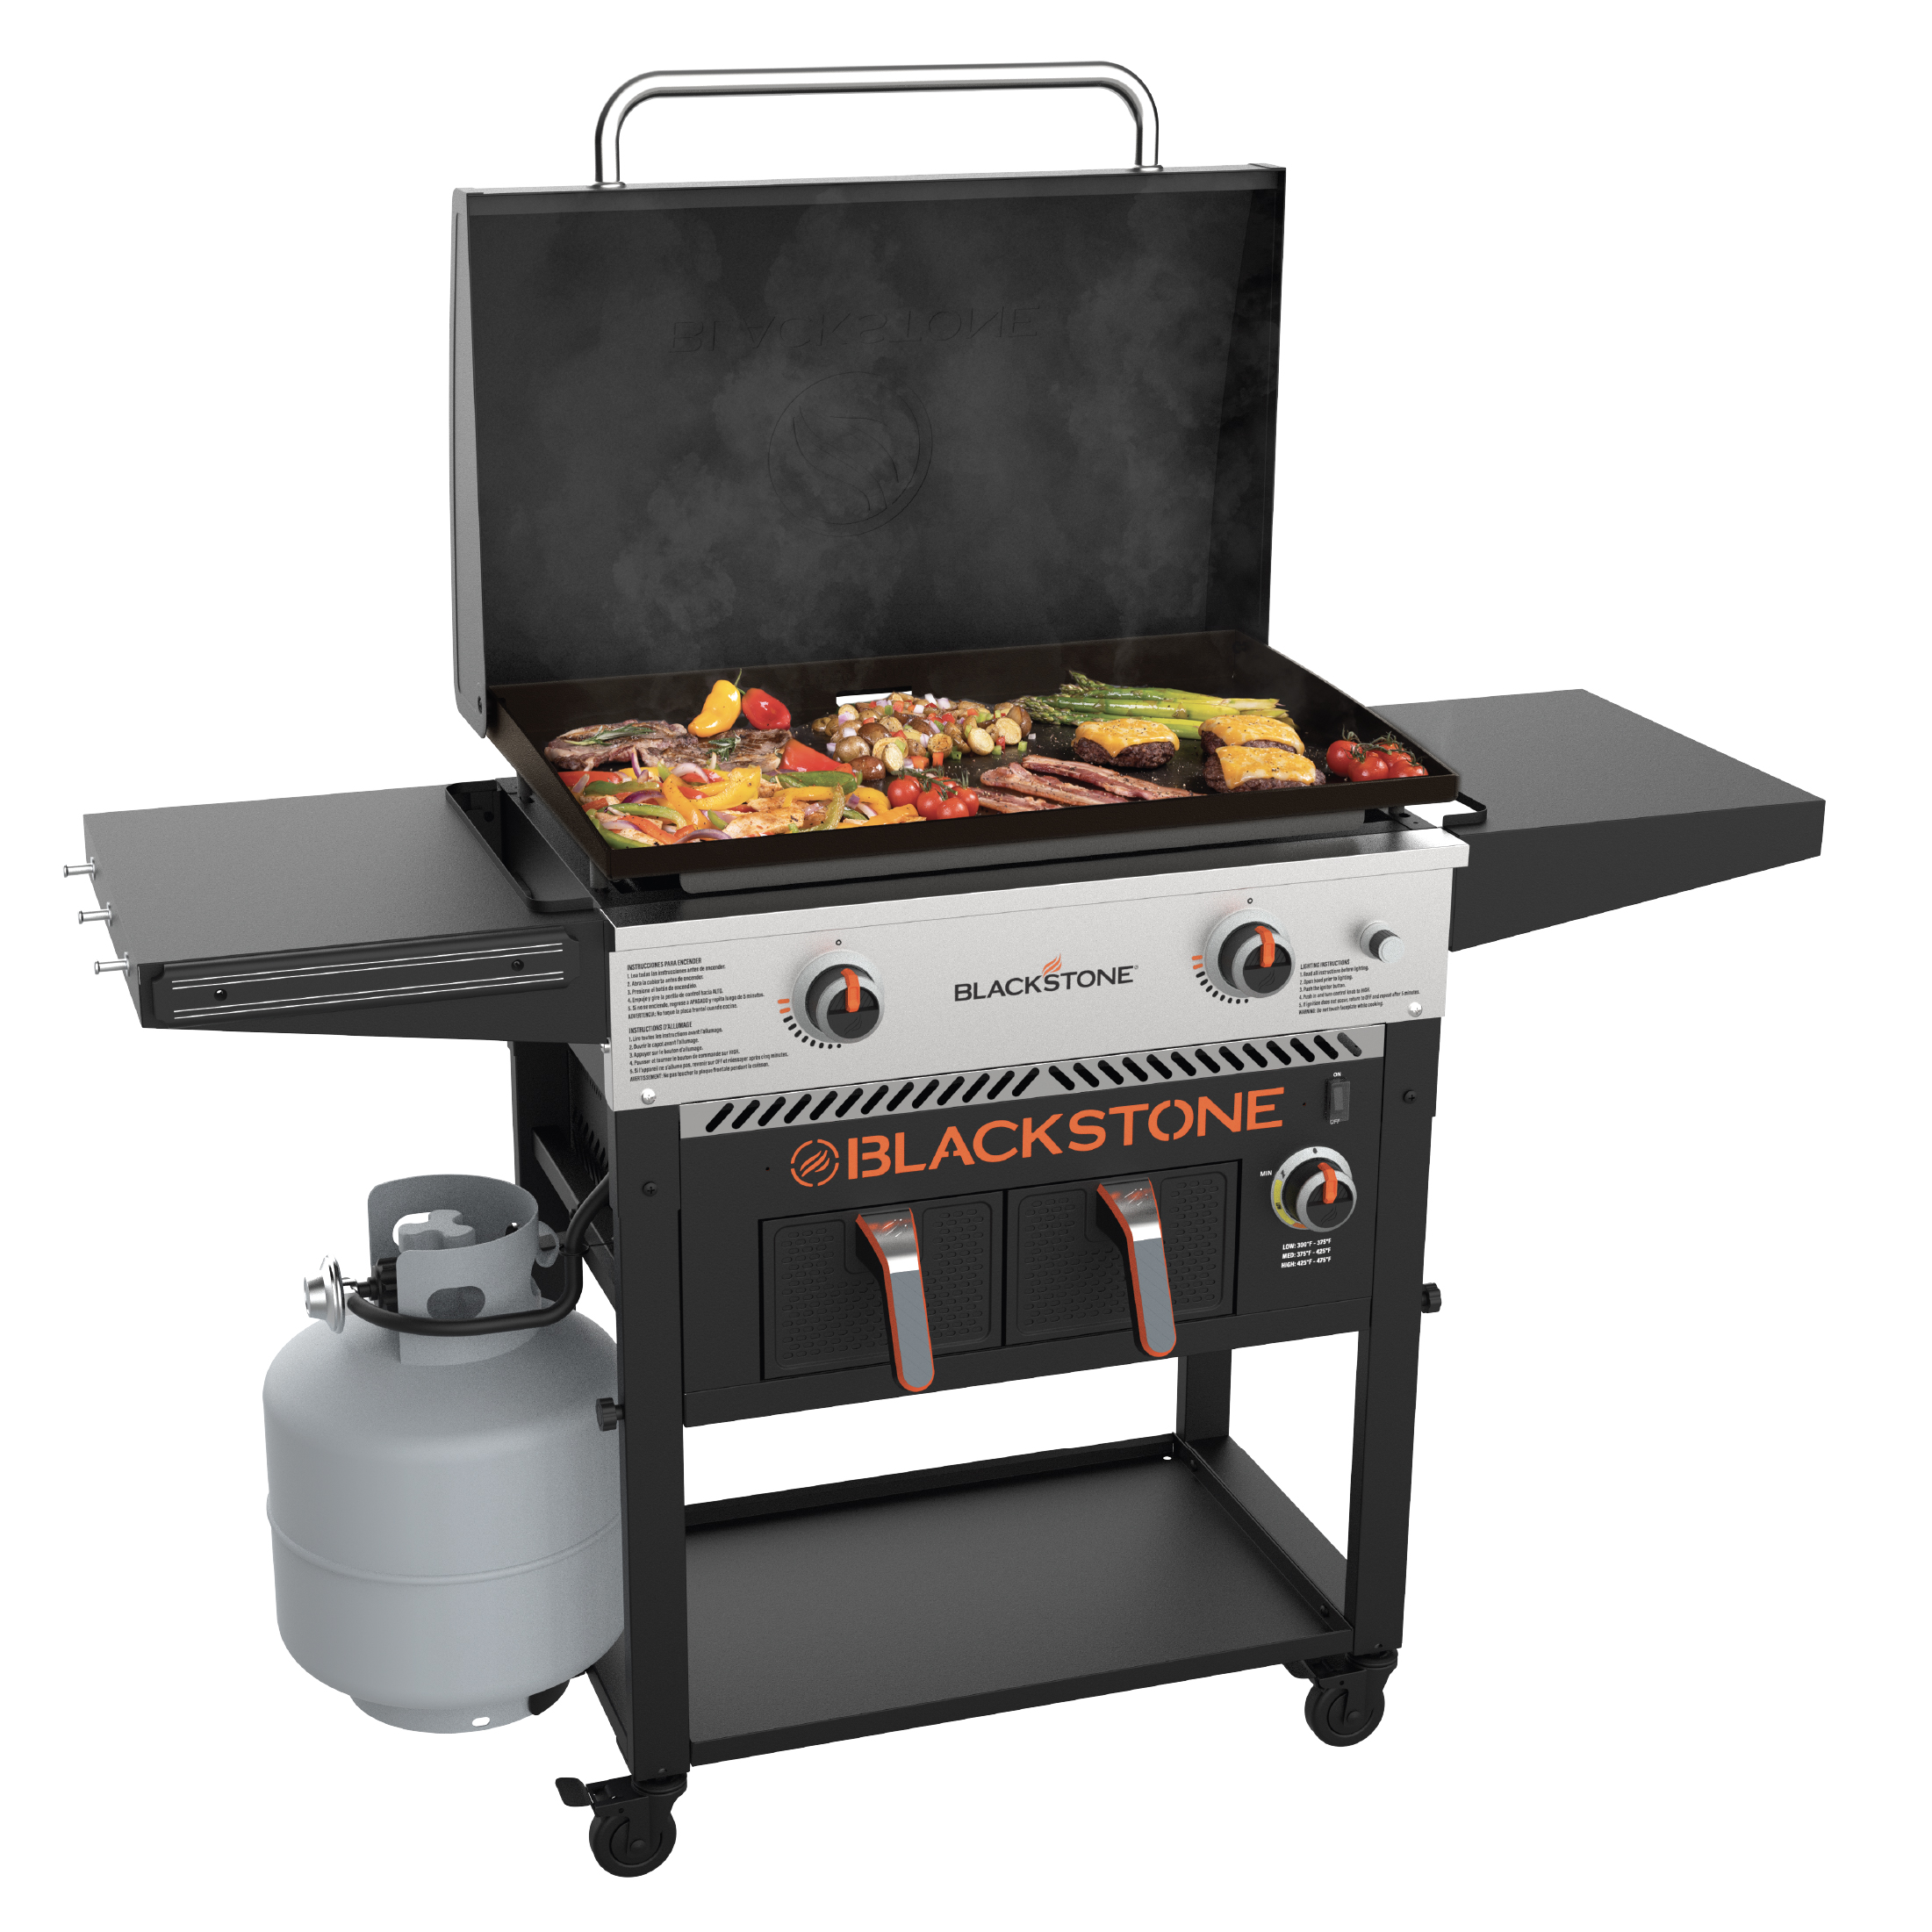 Blackstone 2-Burner 28" Propane Griddle with Air Fryer Combo - image 1 of 17